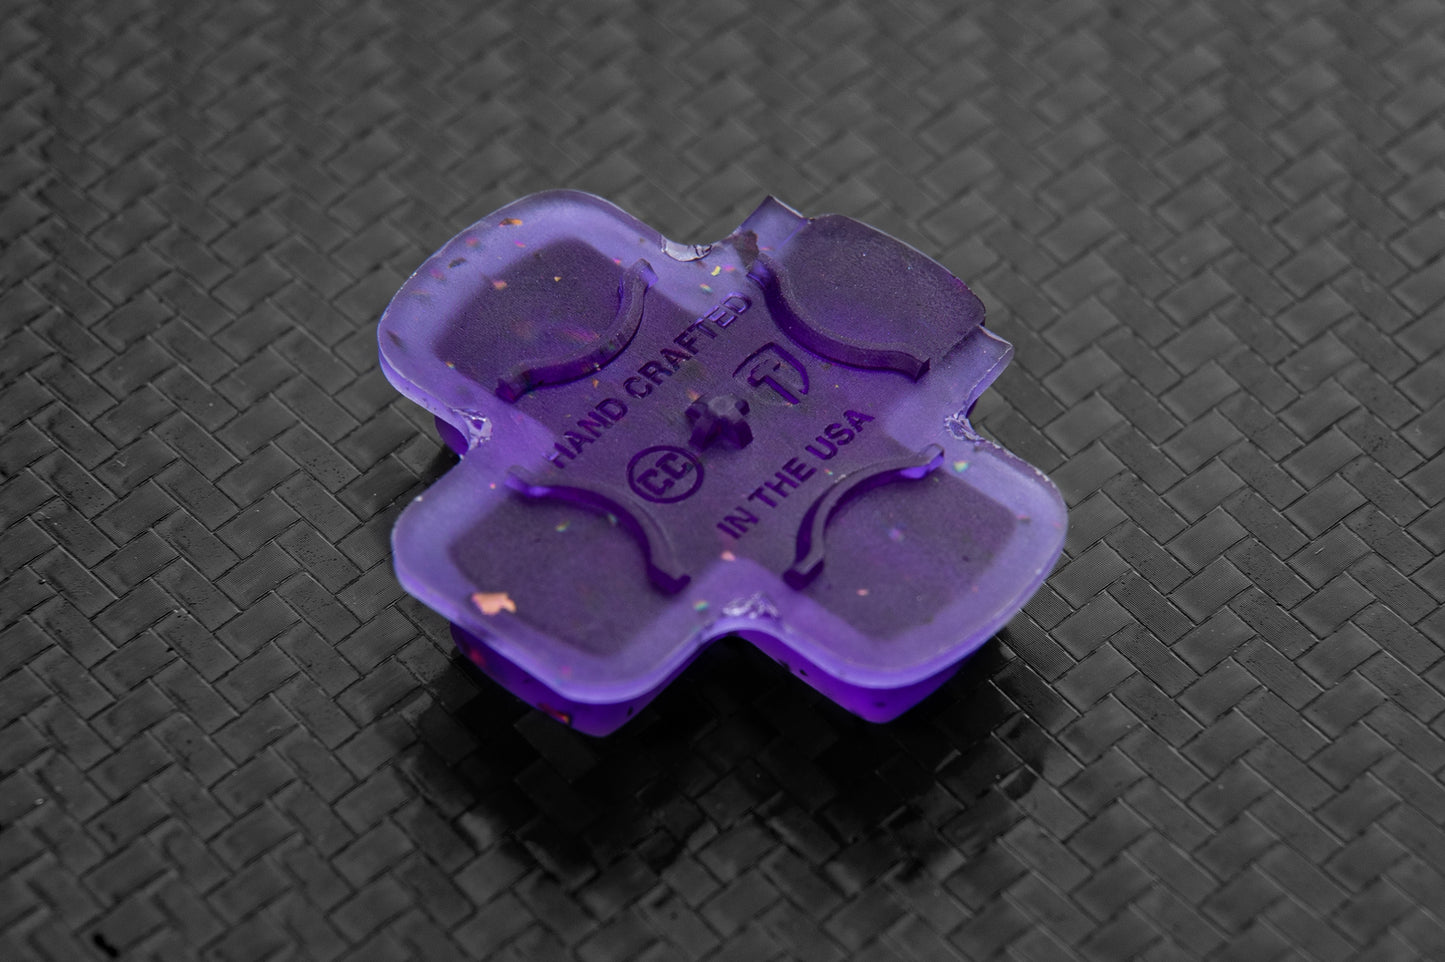 Back side of steam deck dpad transparent purple. Shows made in the usa and logos